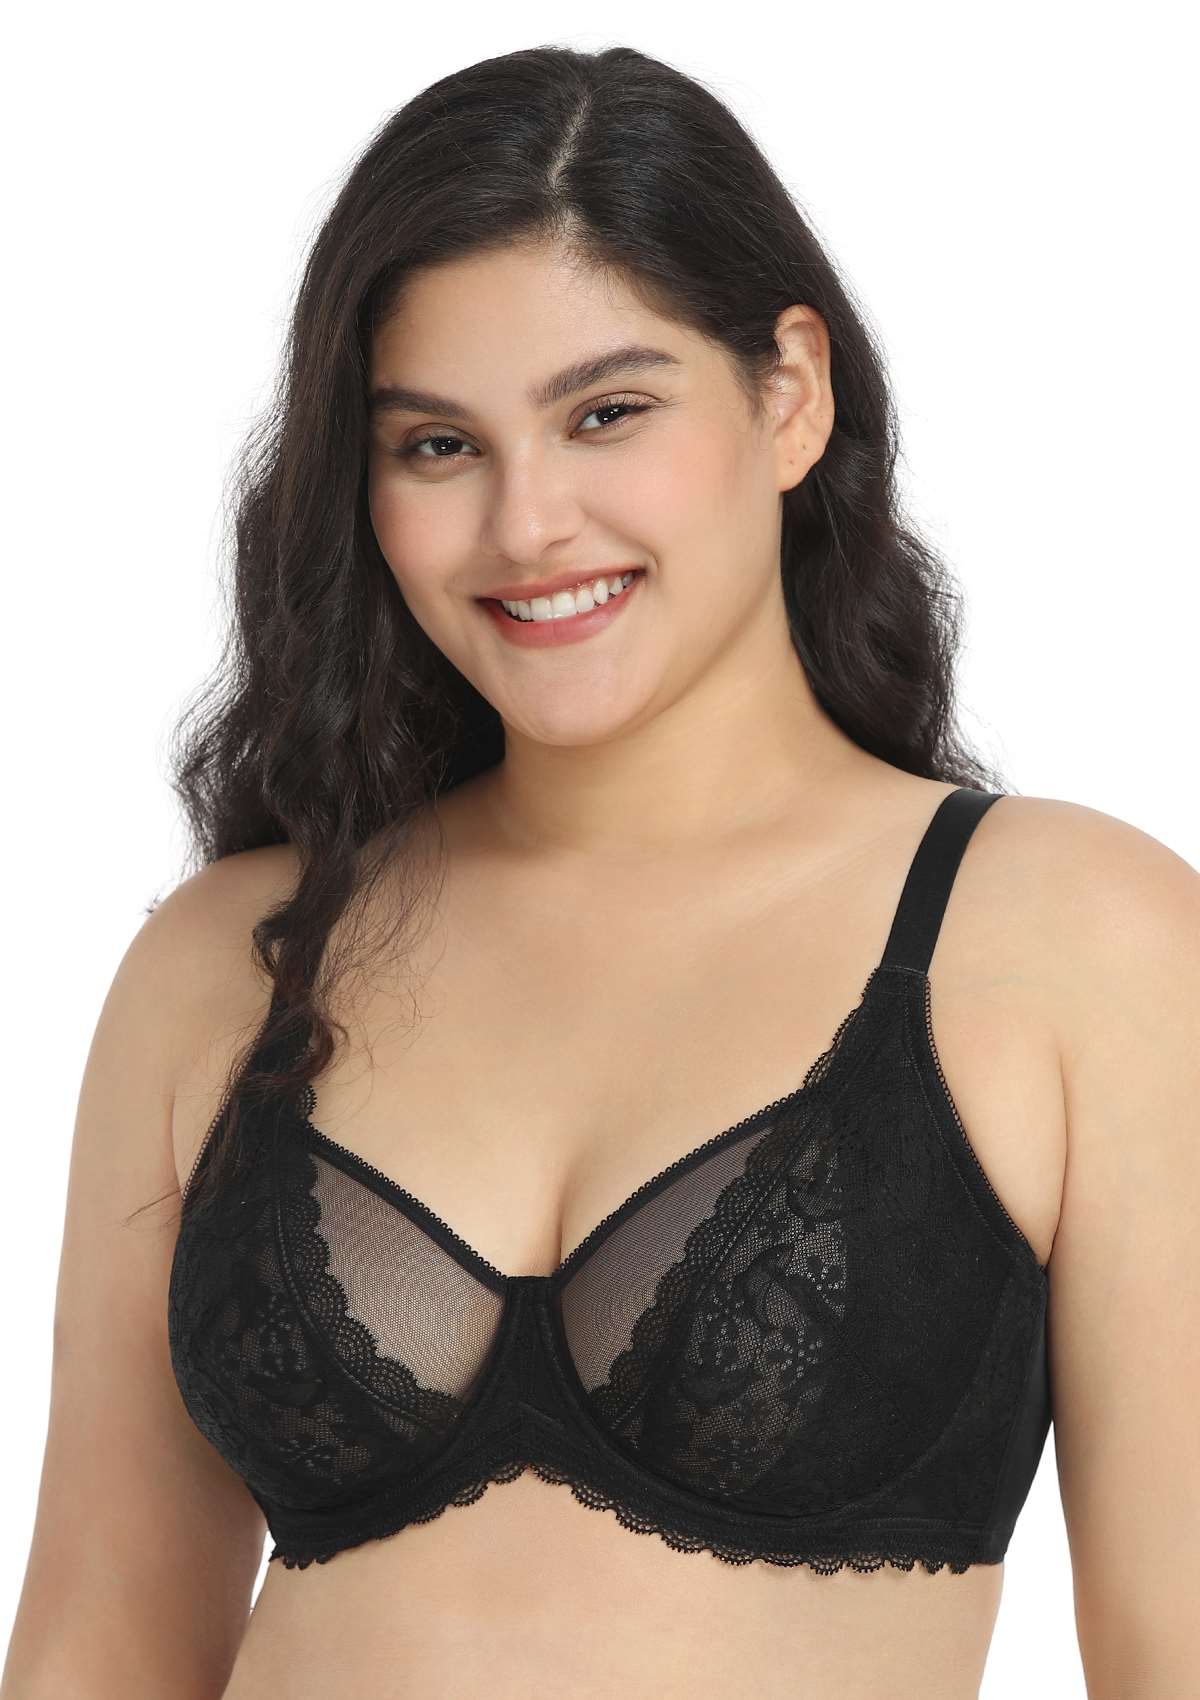 HSIA Anemone Big Bra: Best Bra For Lift And Support, Floral Bra - Black / 34 / D